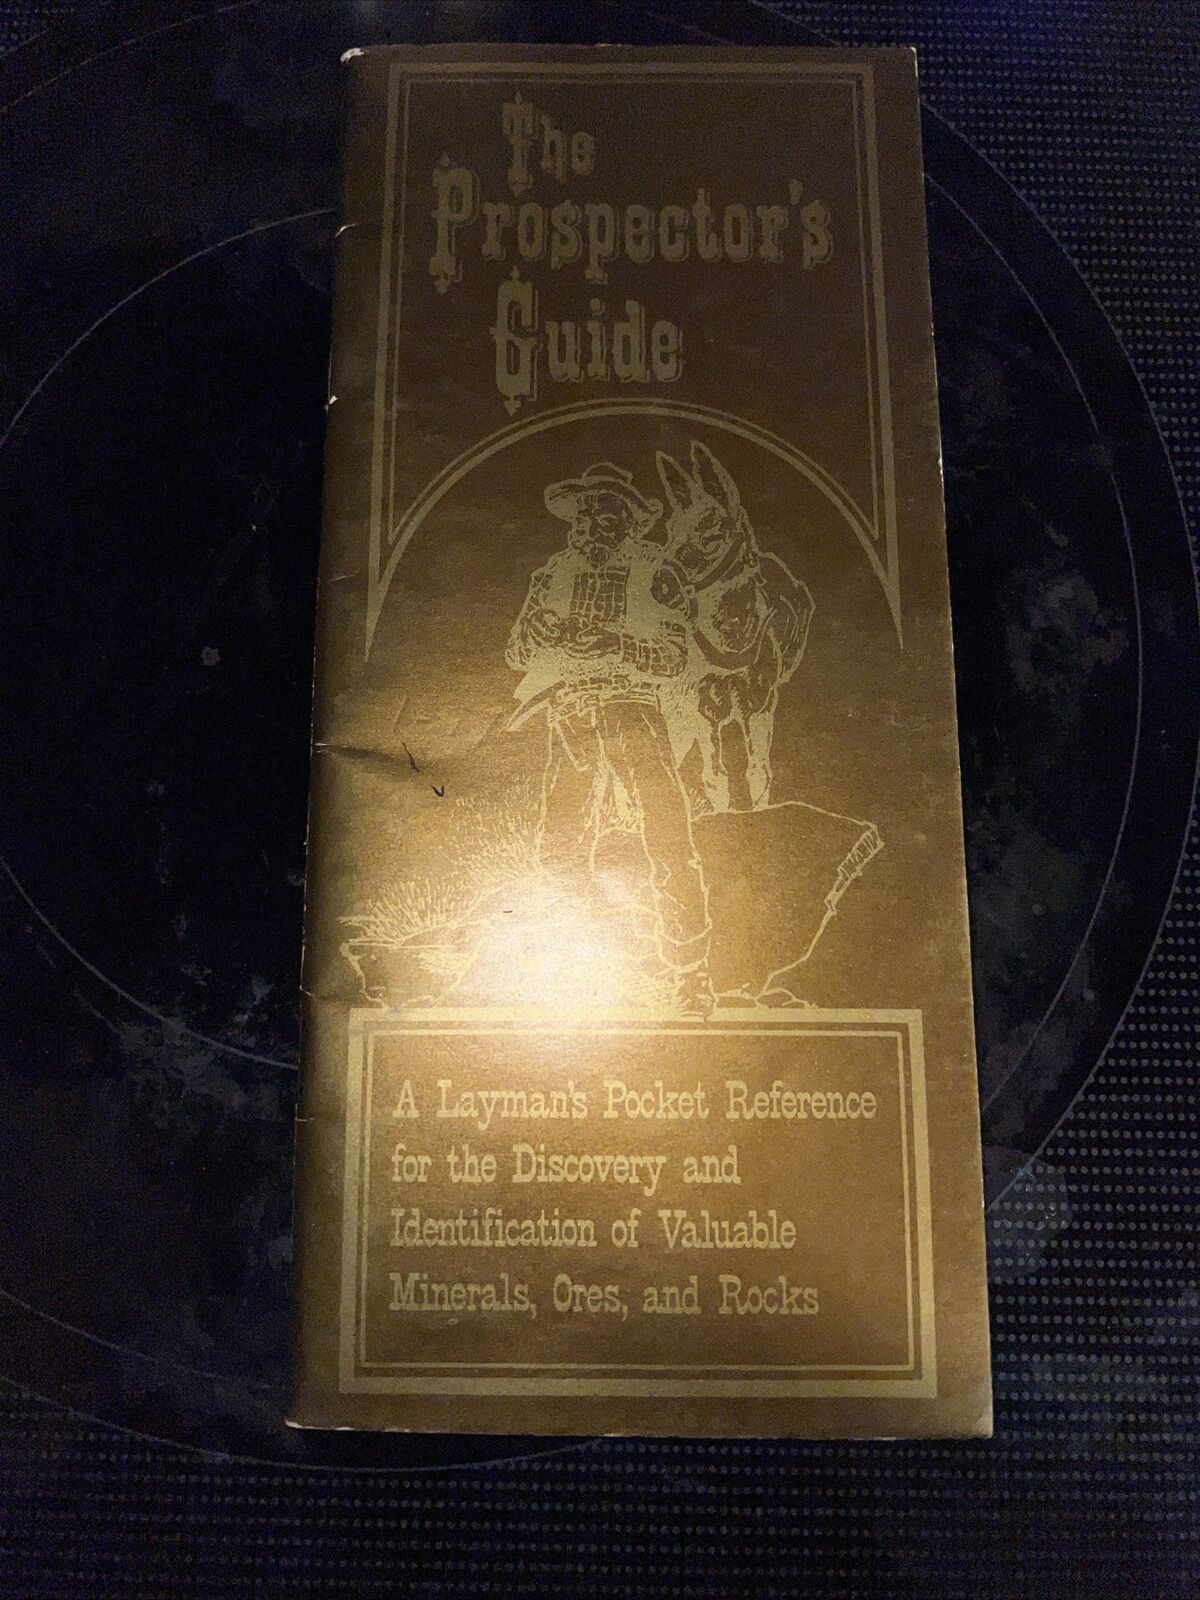 The prospector’s Guide: A Layman’s Pocket Reference Minerals, Ores, rocks, 1979